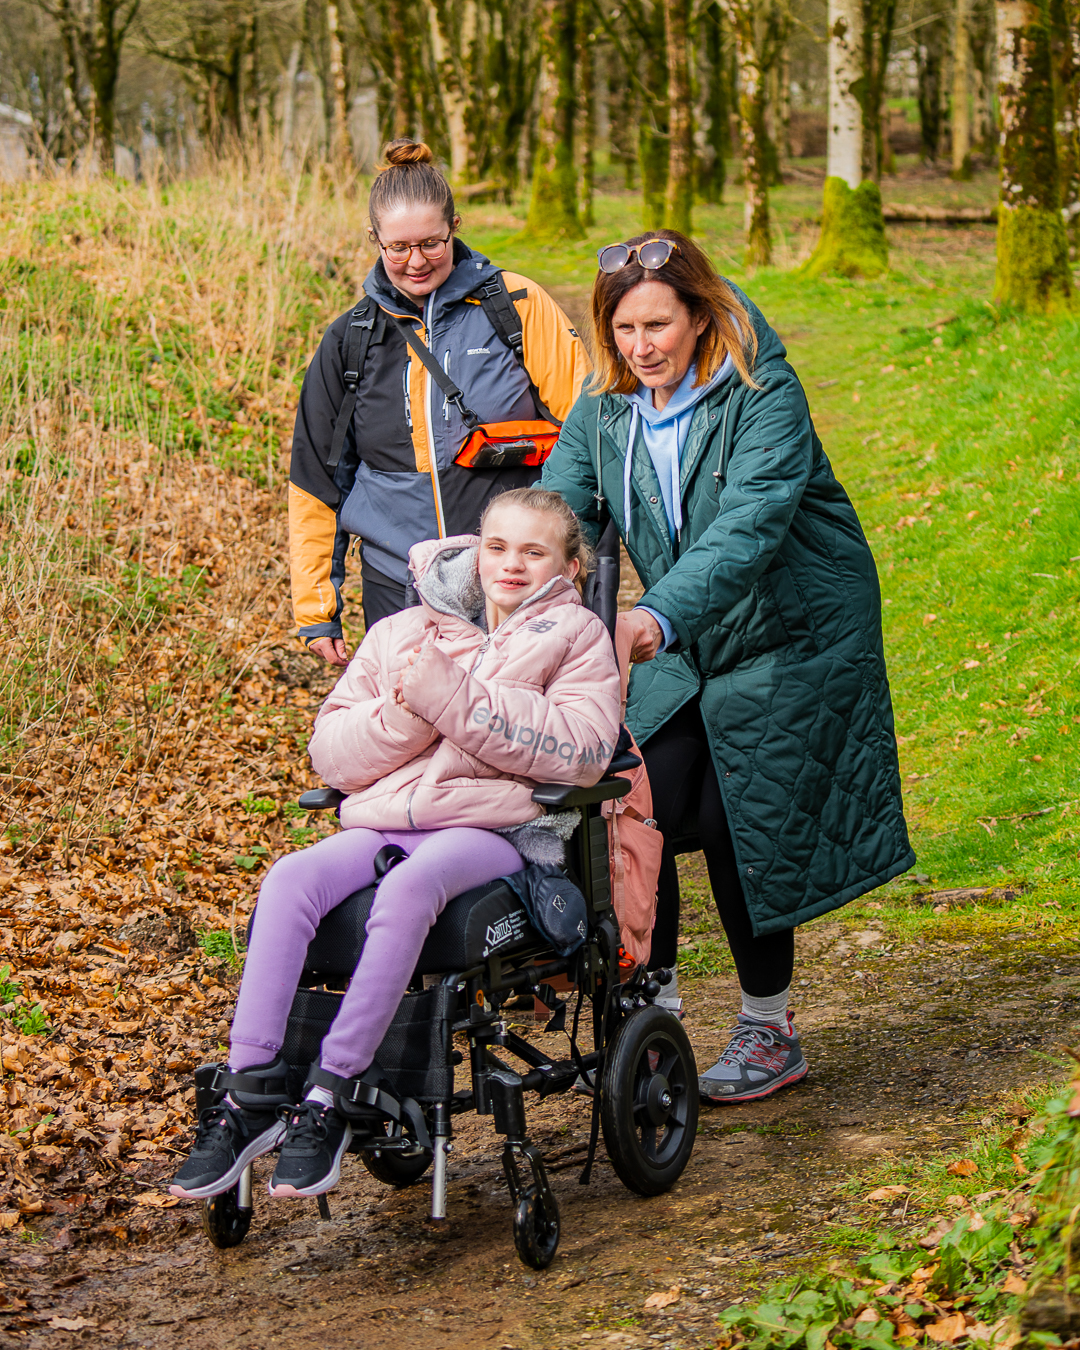 A guest in a wheelchair is being pushed down the hill on a paved path by another guest in a long green coat. Behind them is an instructor walking down the path with greenery either side of them all.